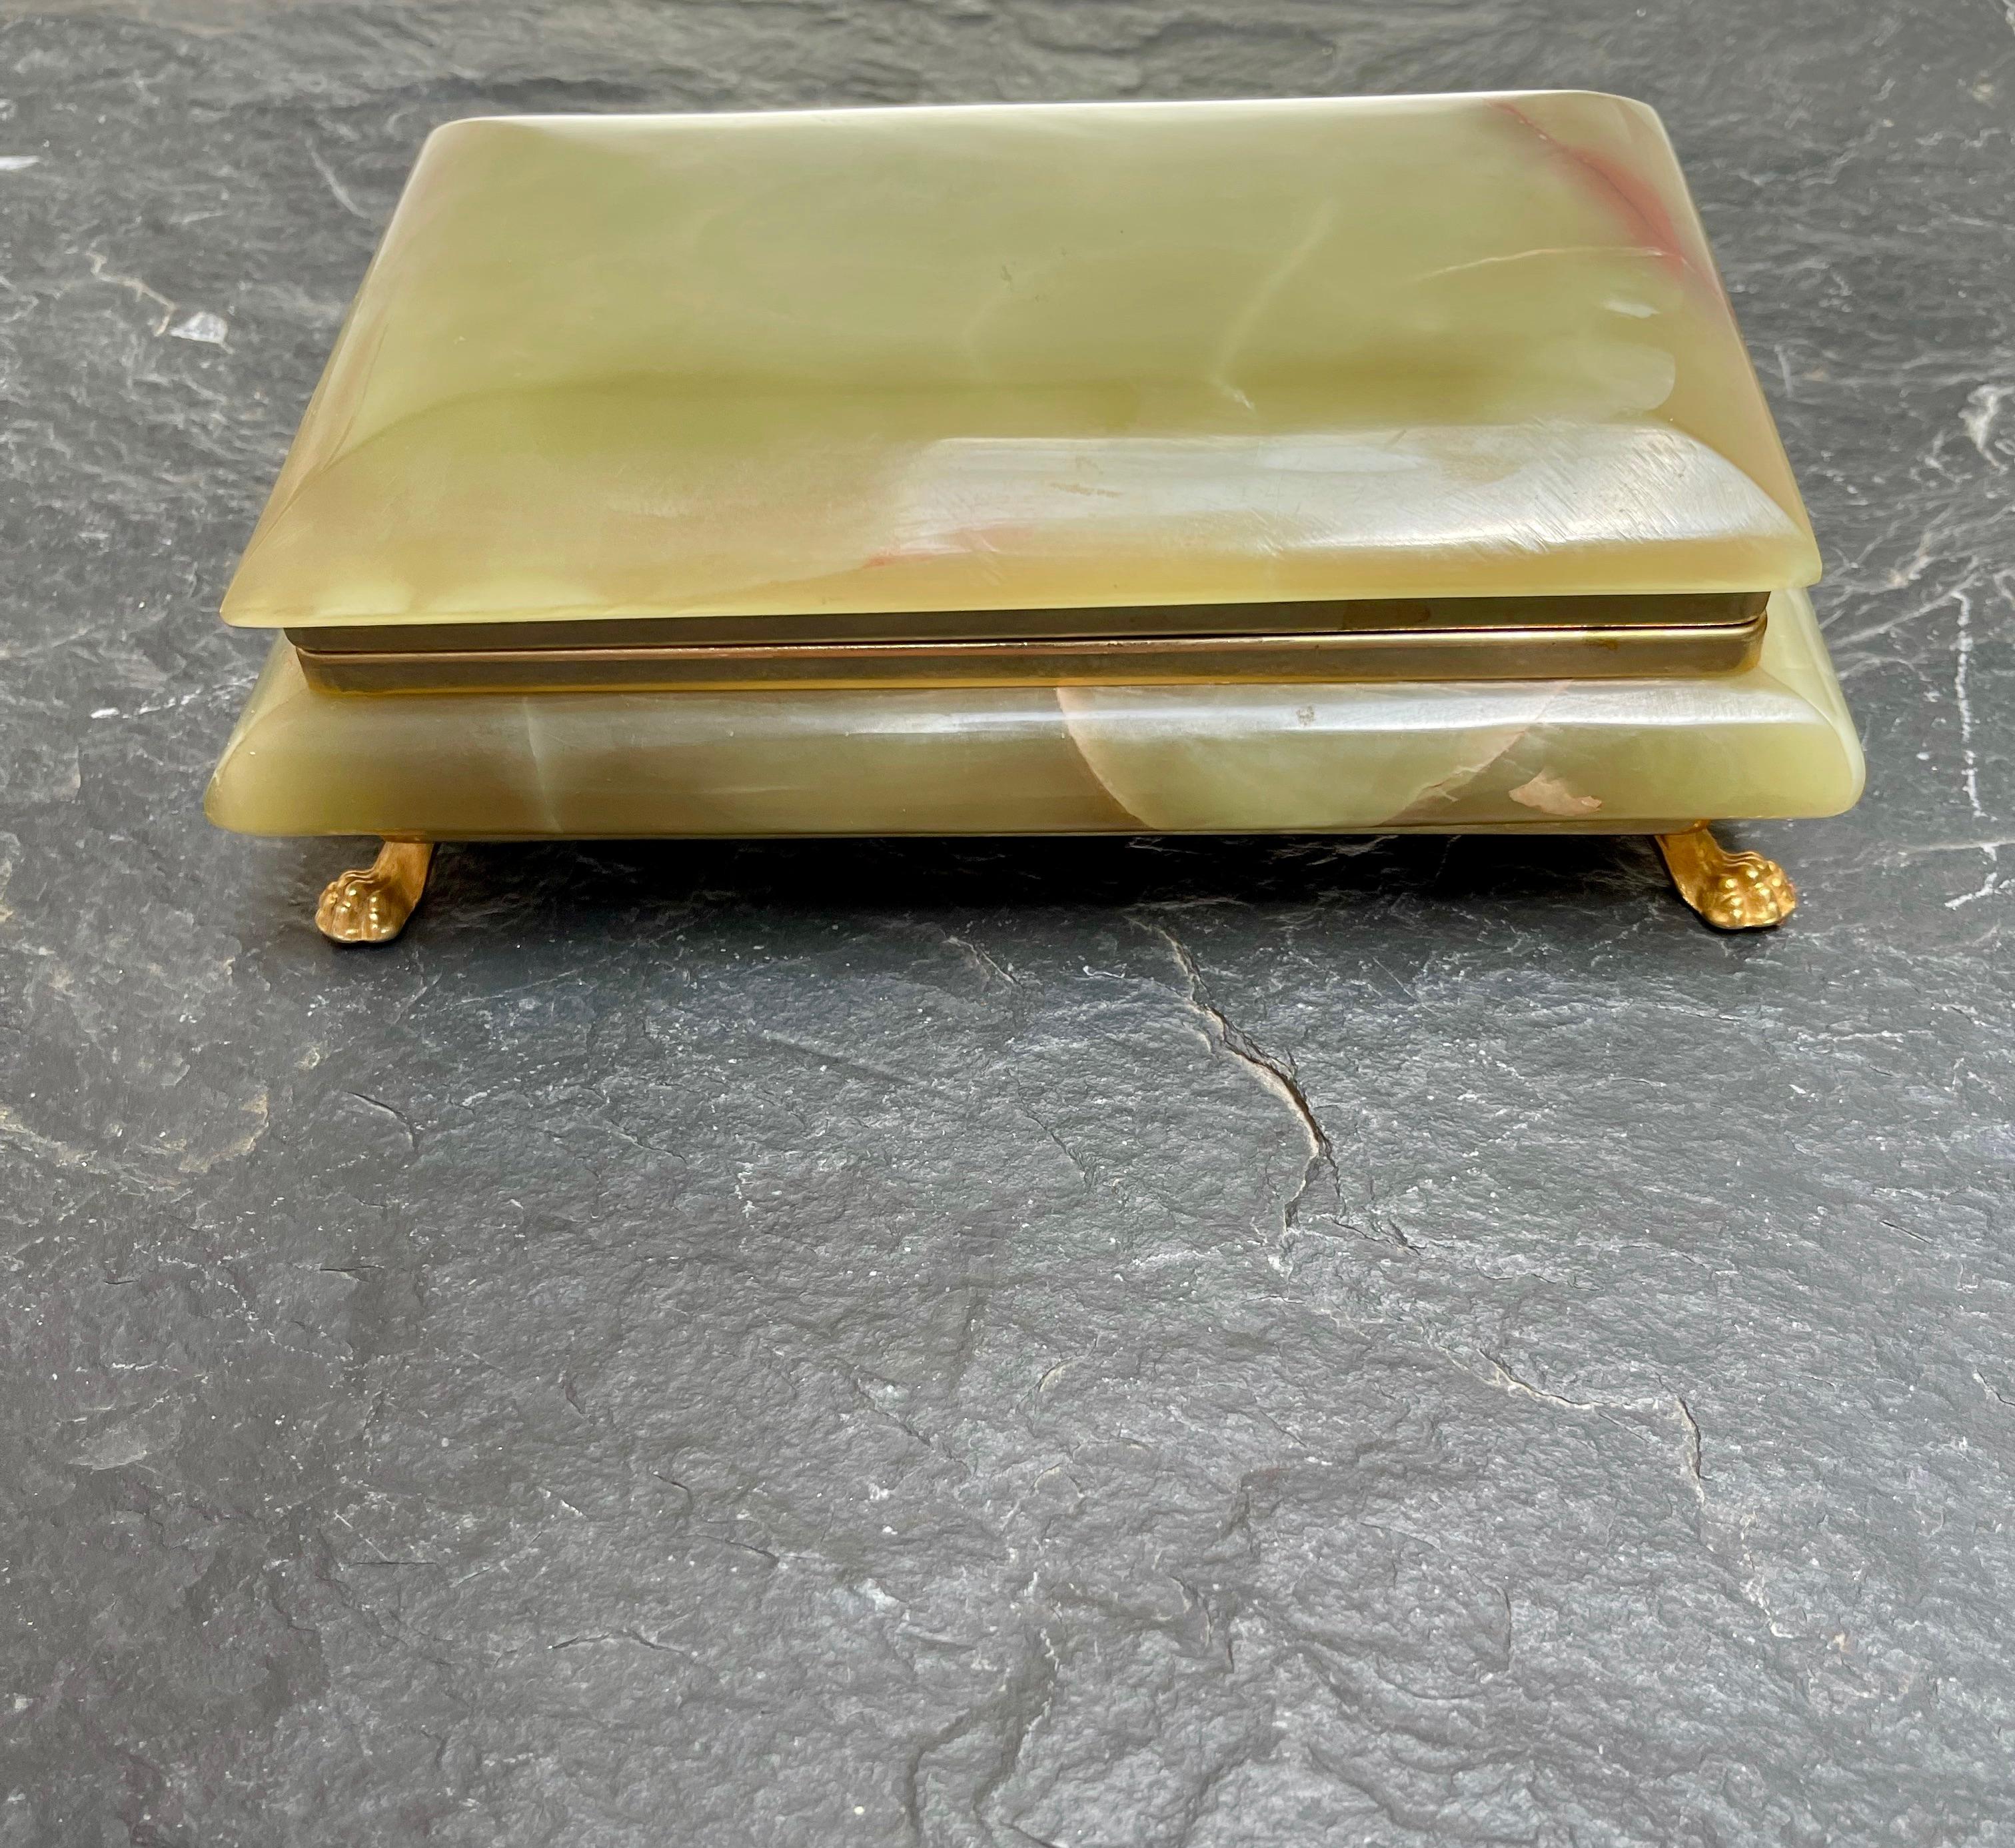 Wonderfully hand-crafted and excellent condition, late 20th century box.

This hand-crafted box from mid to late 20th century Italy is made of the most beautiful green onyx. This natural mineral stone box is shaped in a very stylish Roman classical